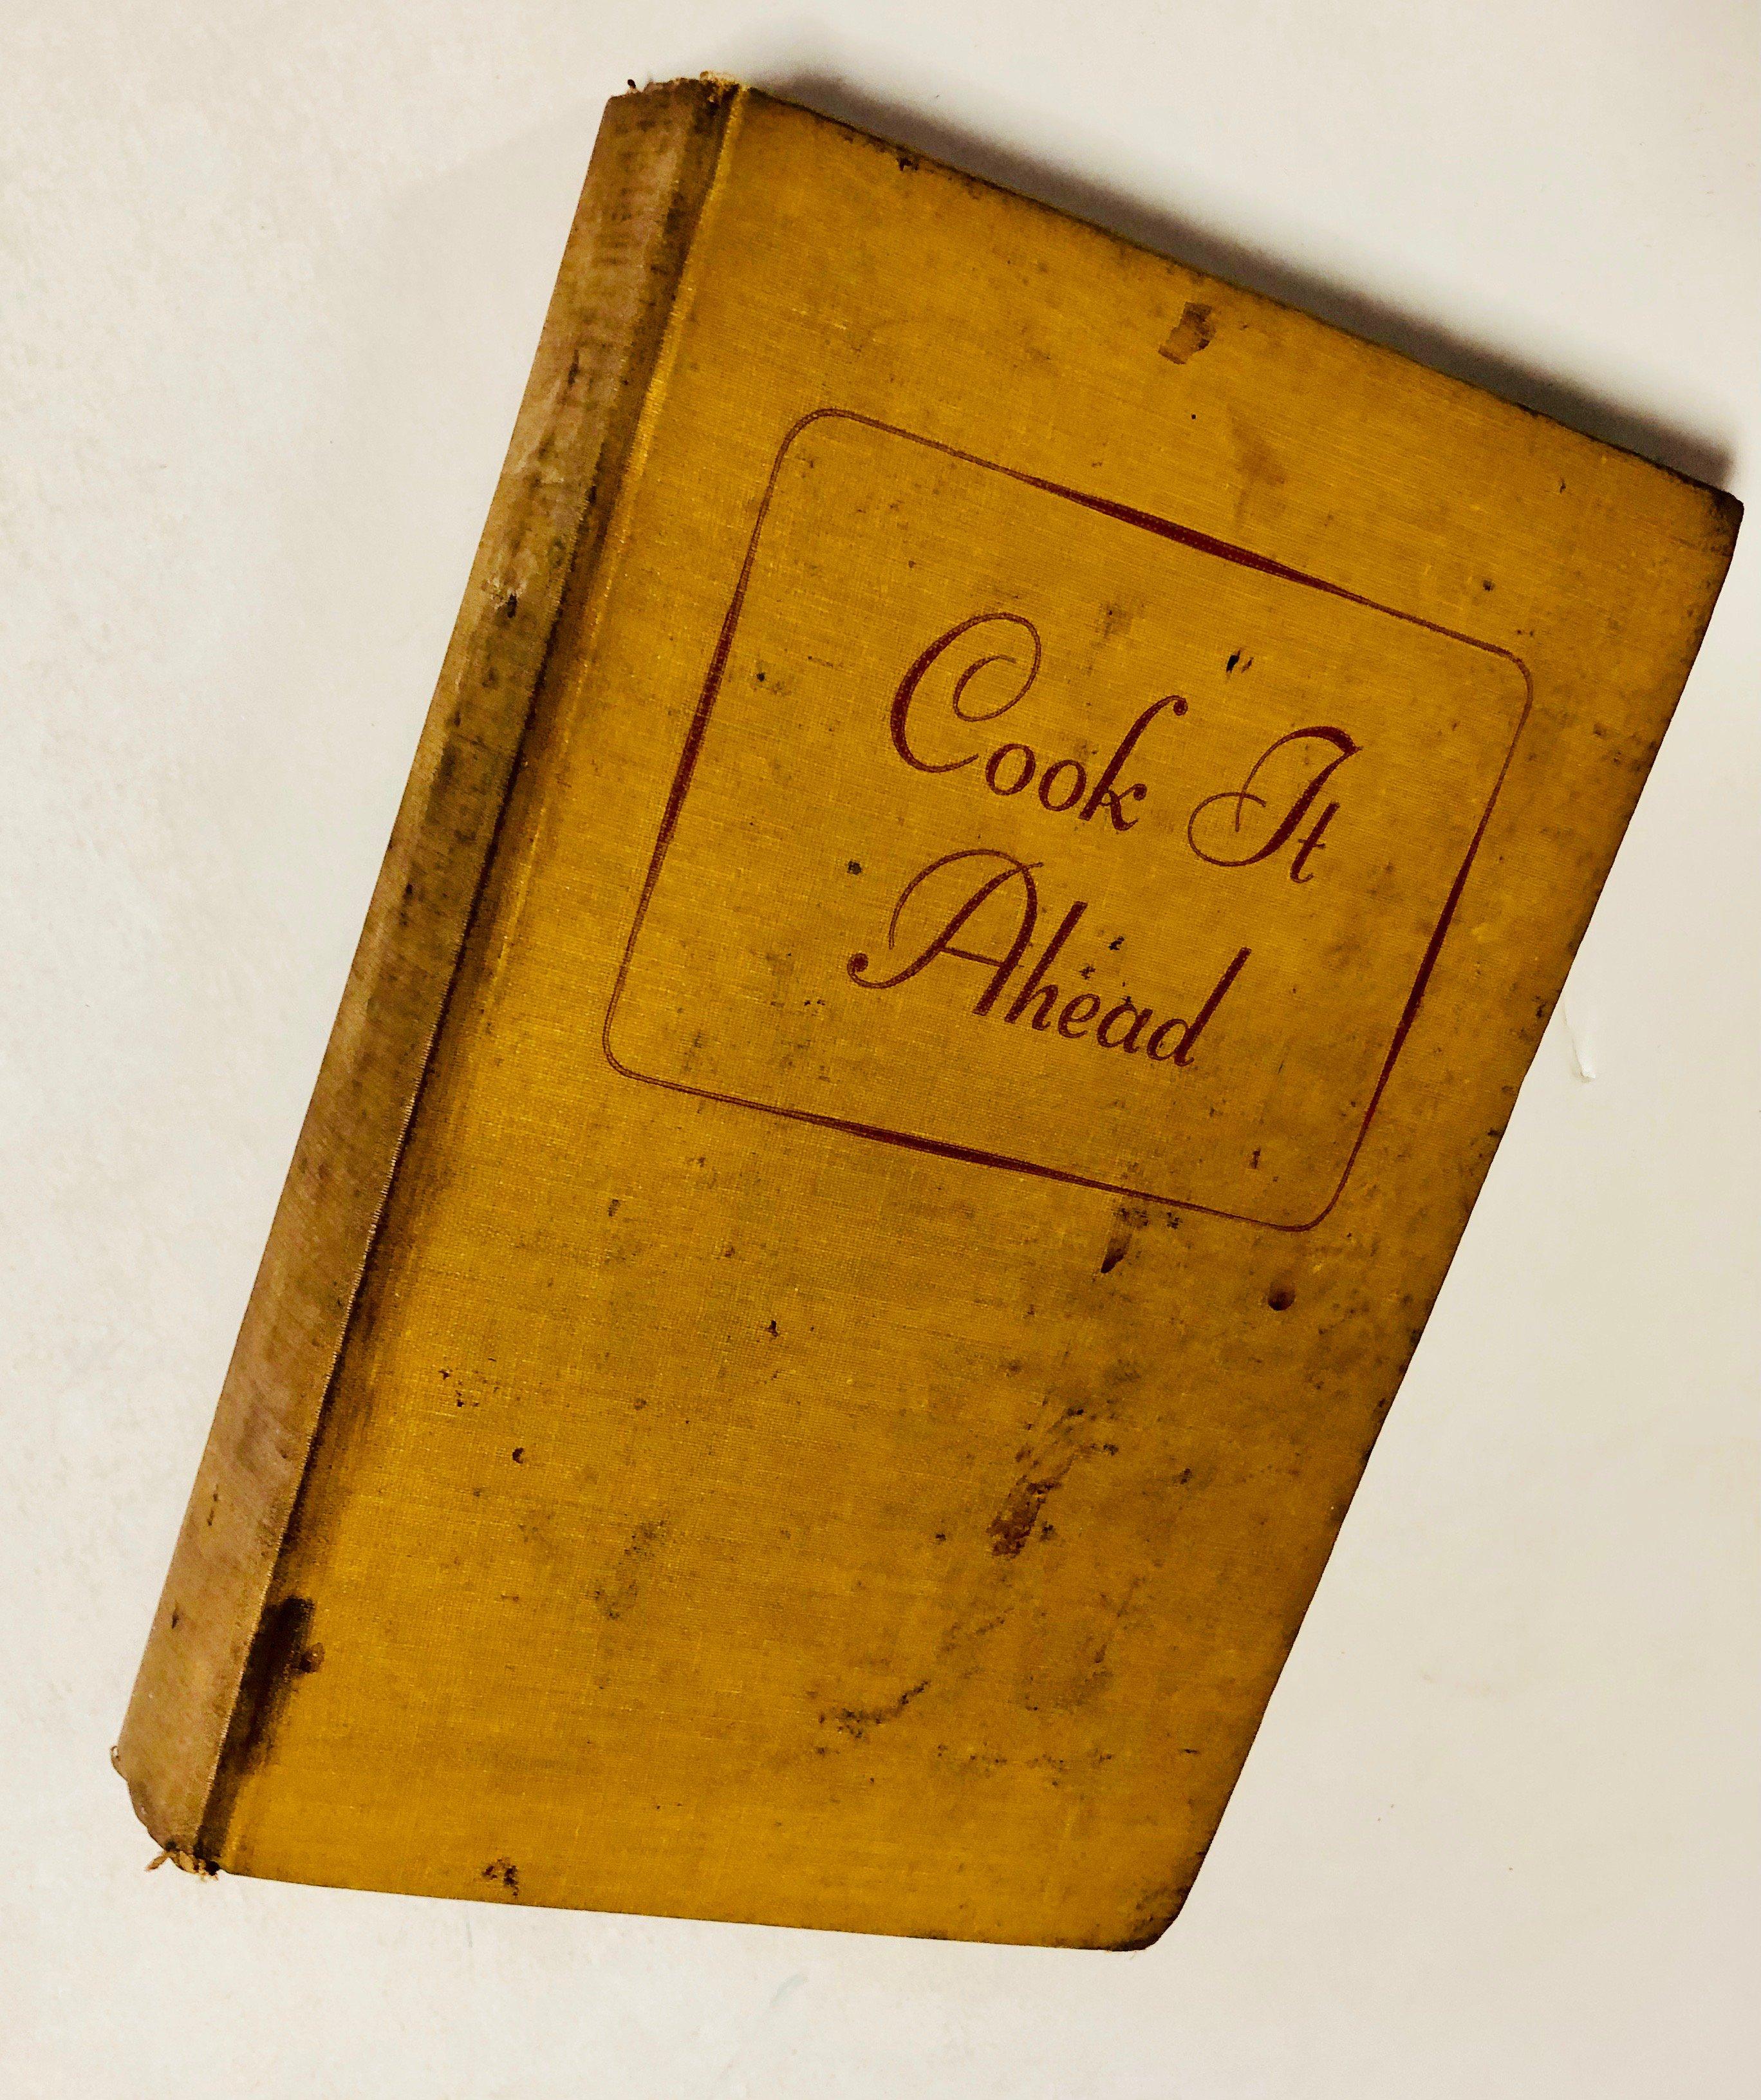 Cook It Ahead by Elinore Marvel (1951) SIGNED and The INTERNATIONAL COOK BOOK (1929)